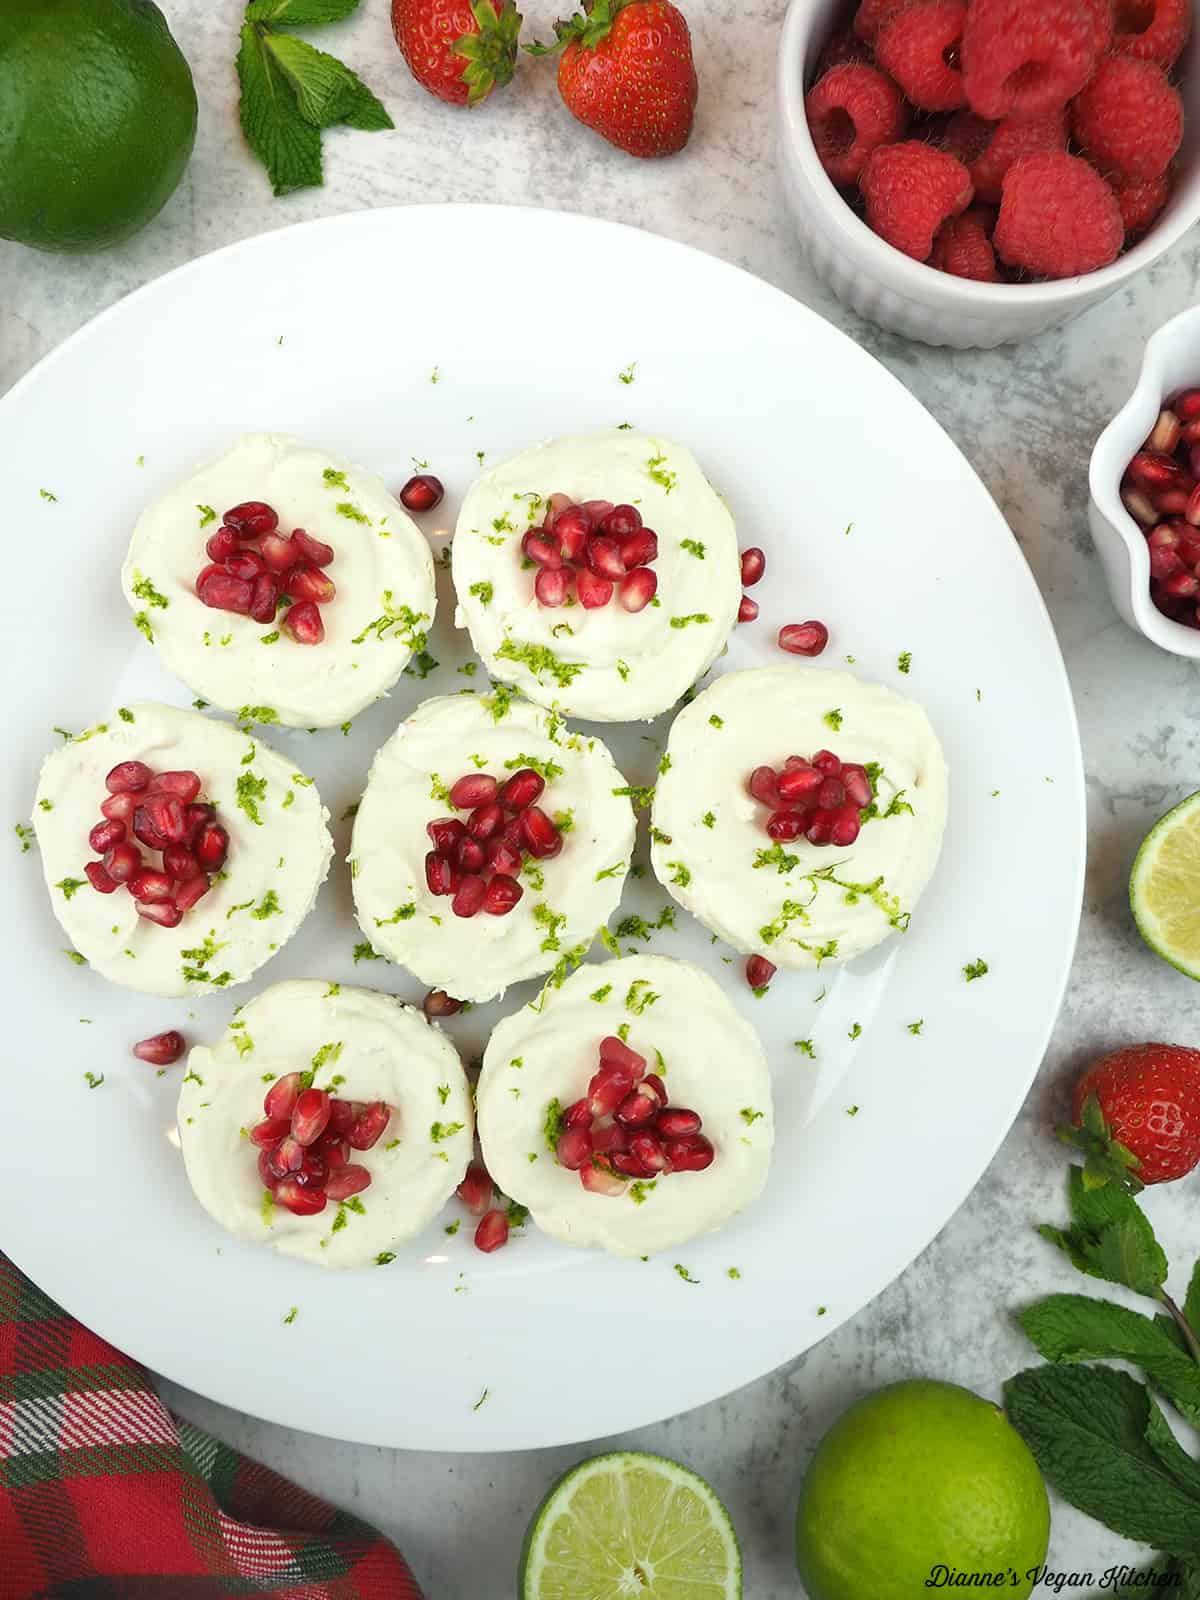 plate of cheesecakes with berries, limes, and mint leaves